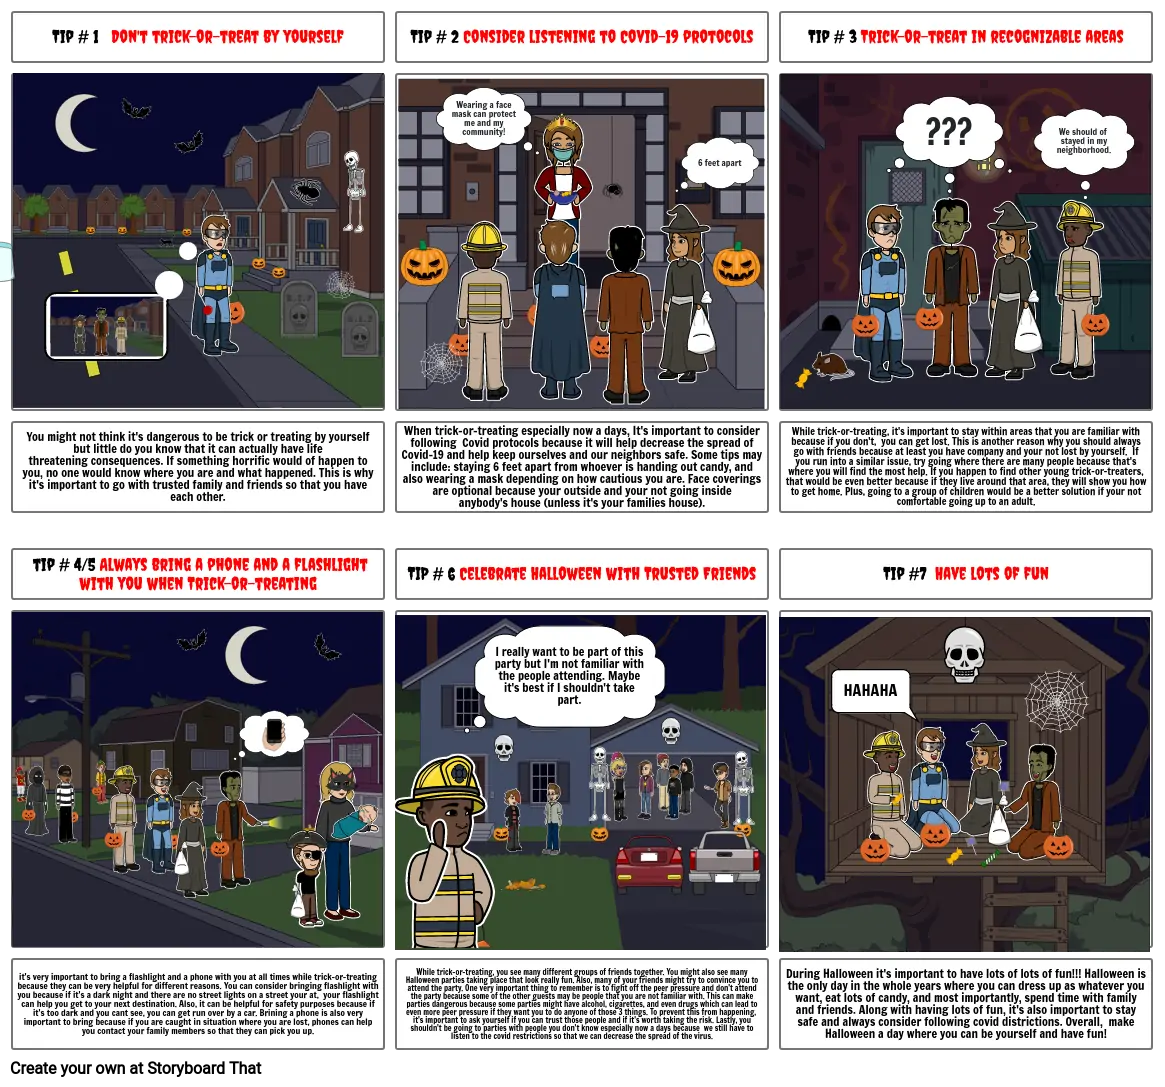 Trick-or-treating safety tips